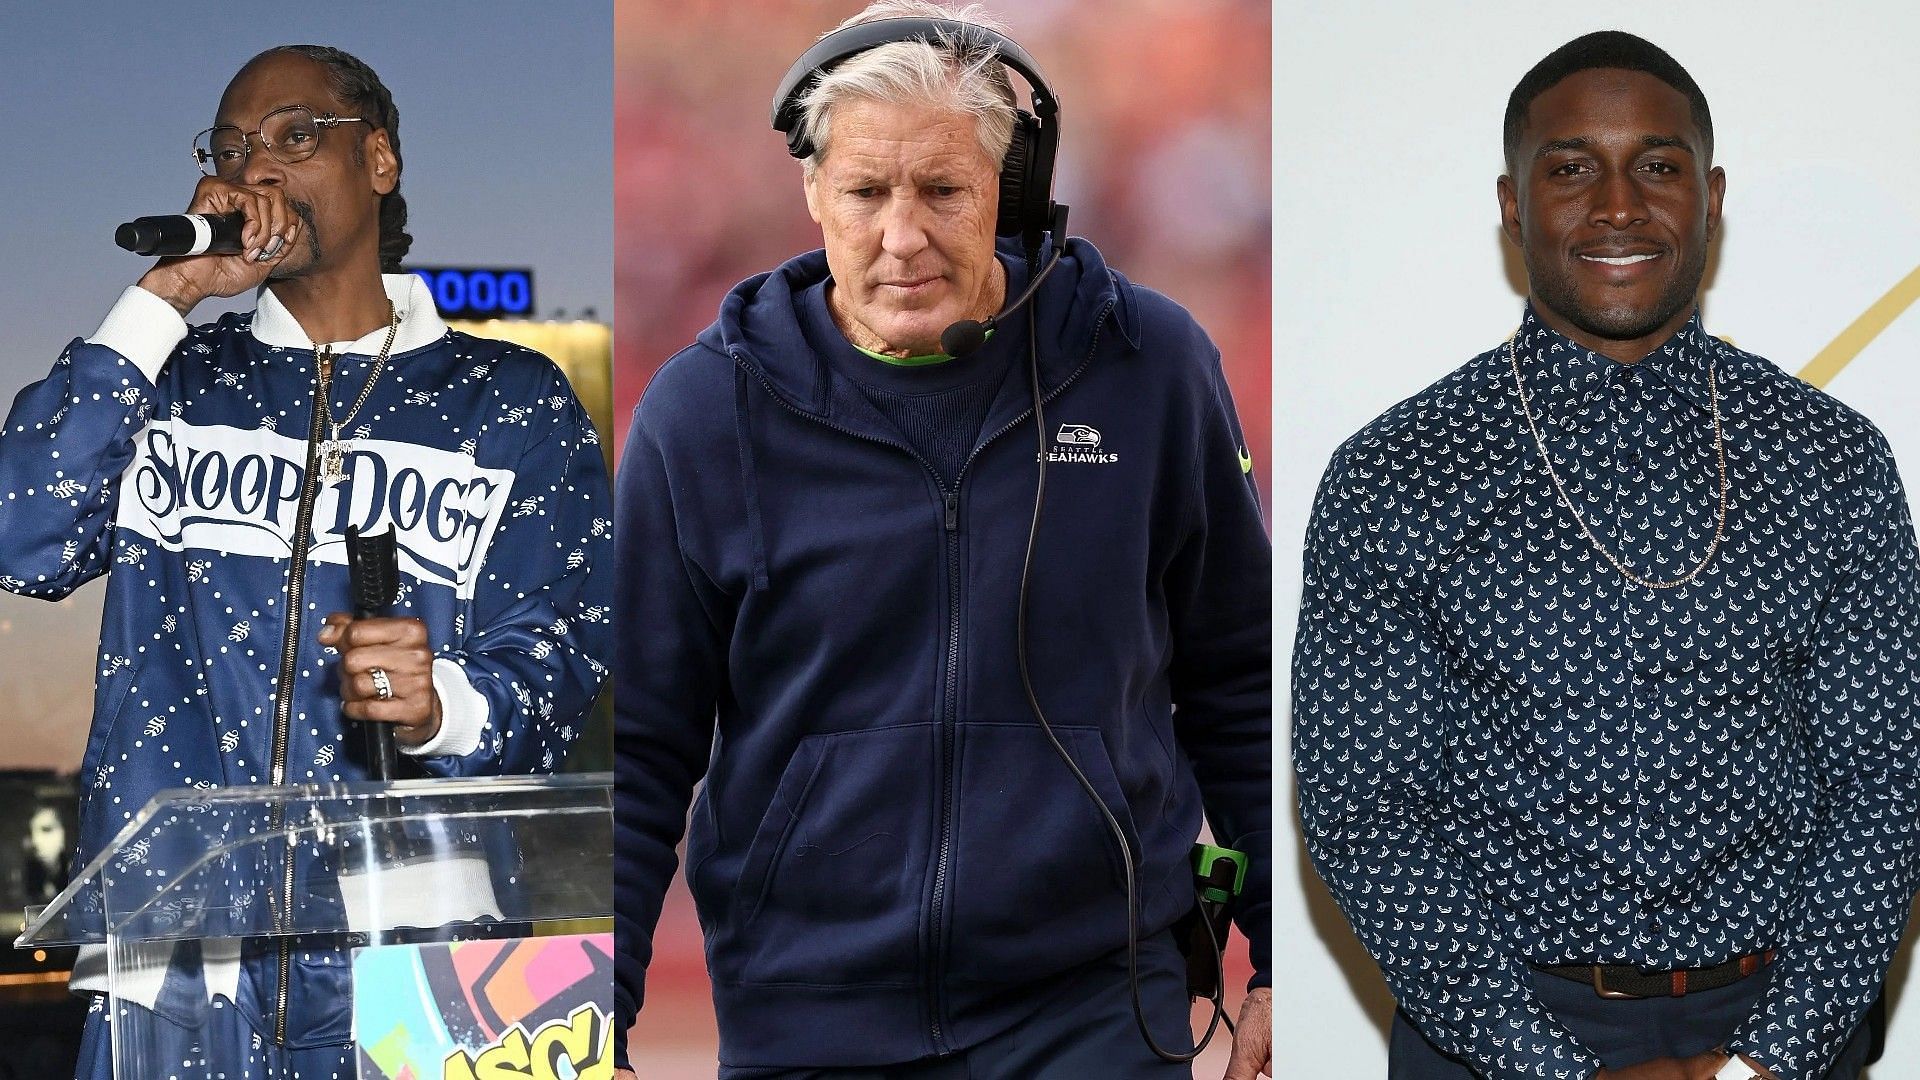 Reggie Bush explains how Pete Carroll had Snoop Dogg running routes at USC